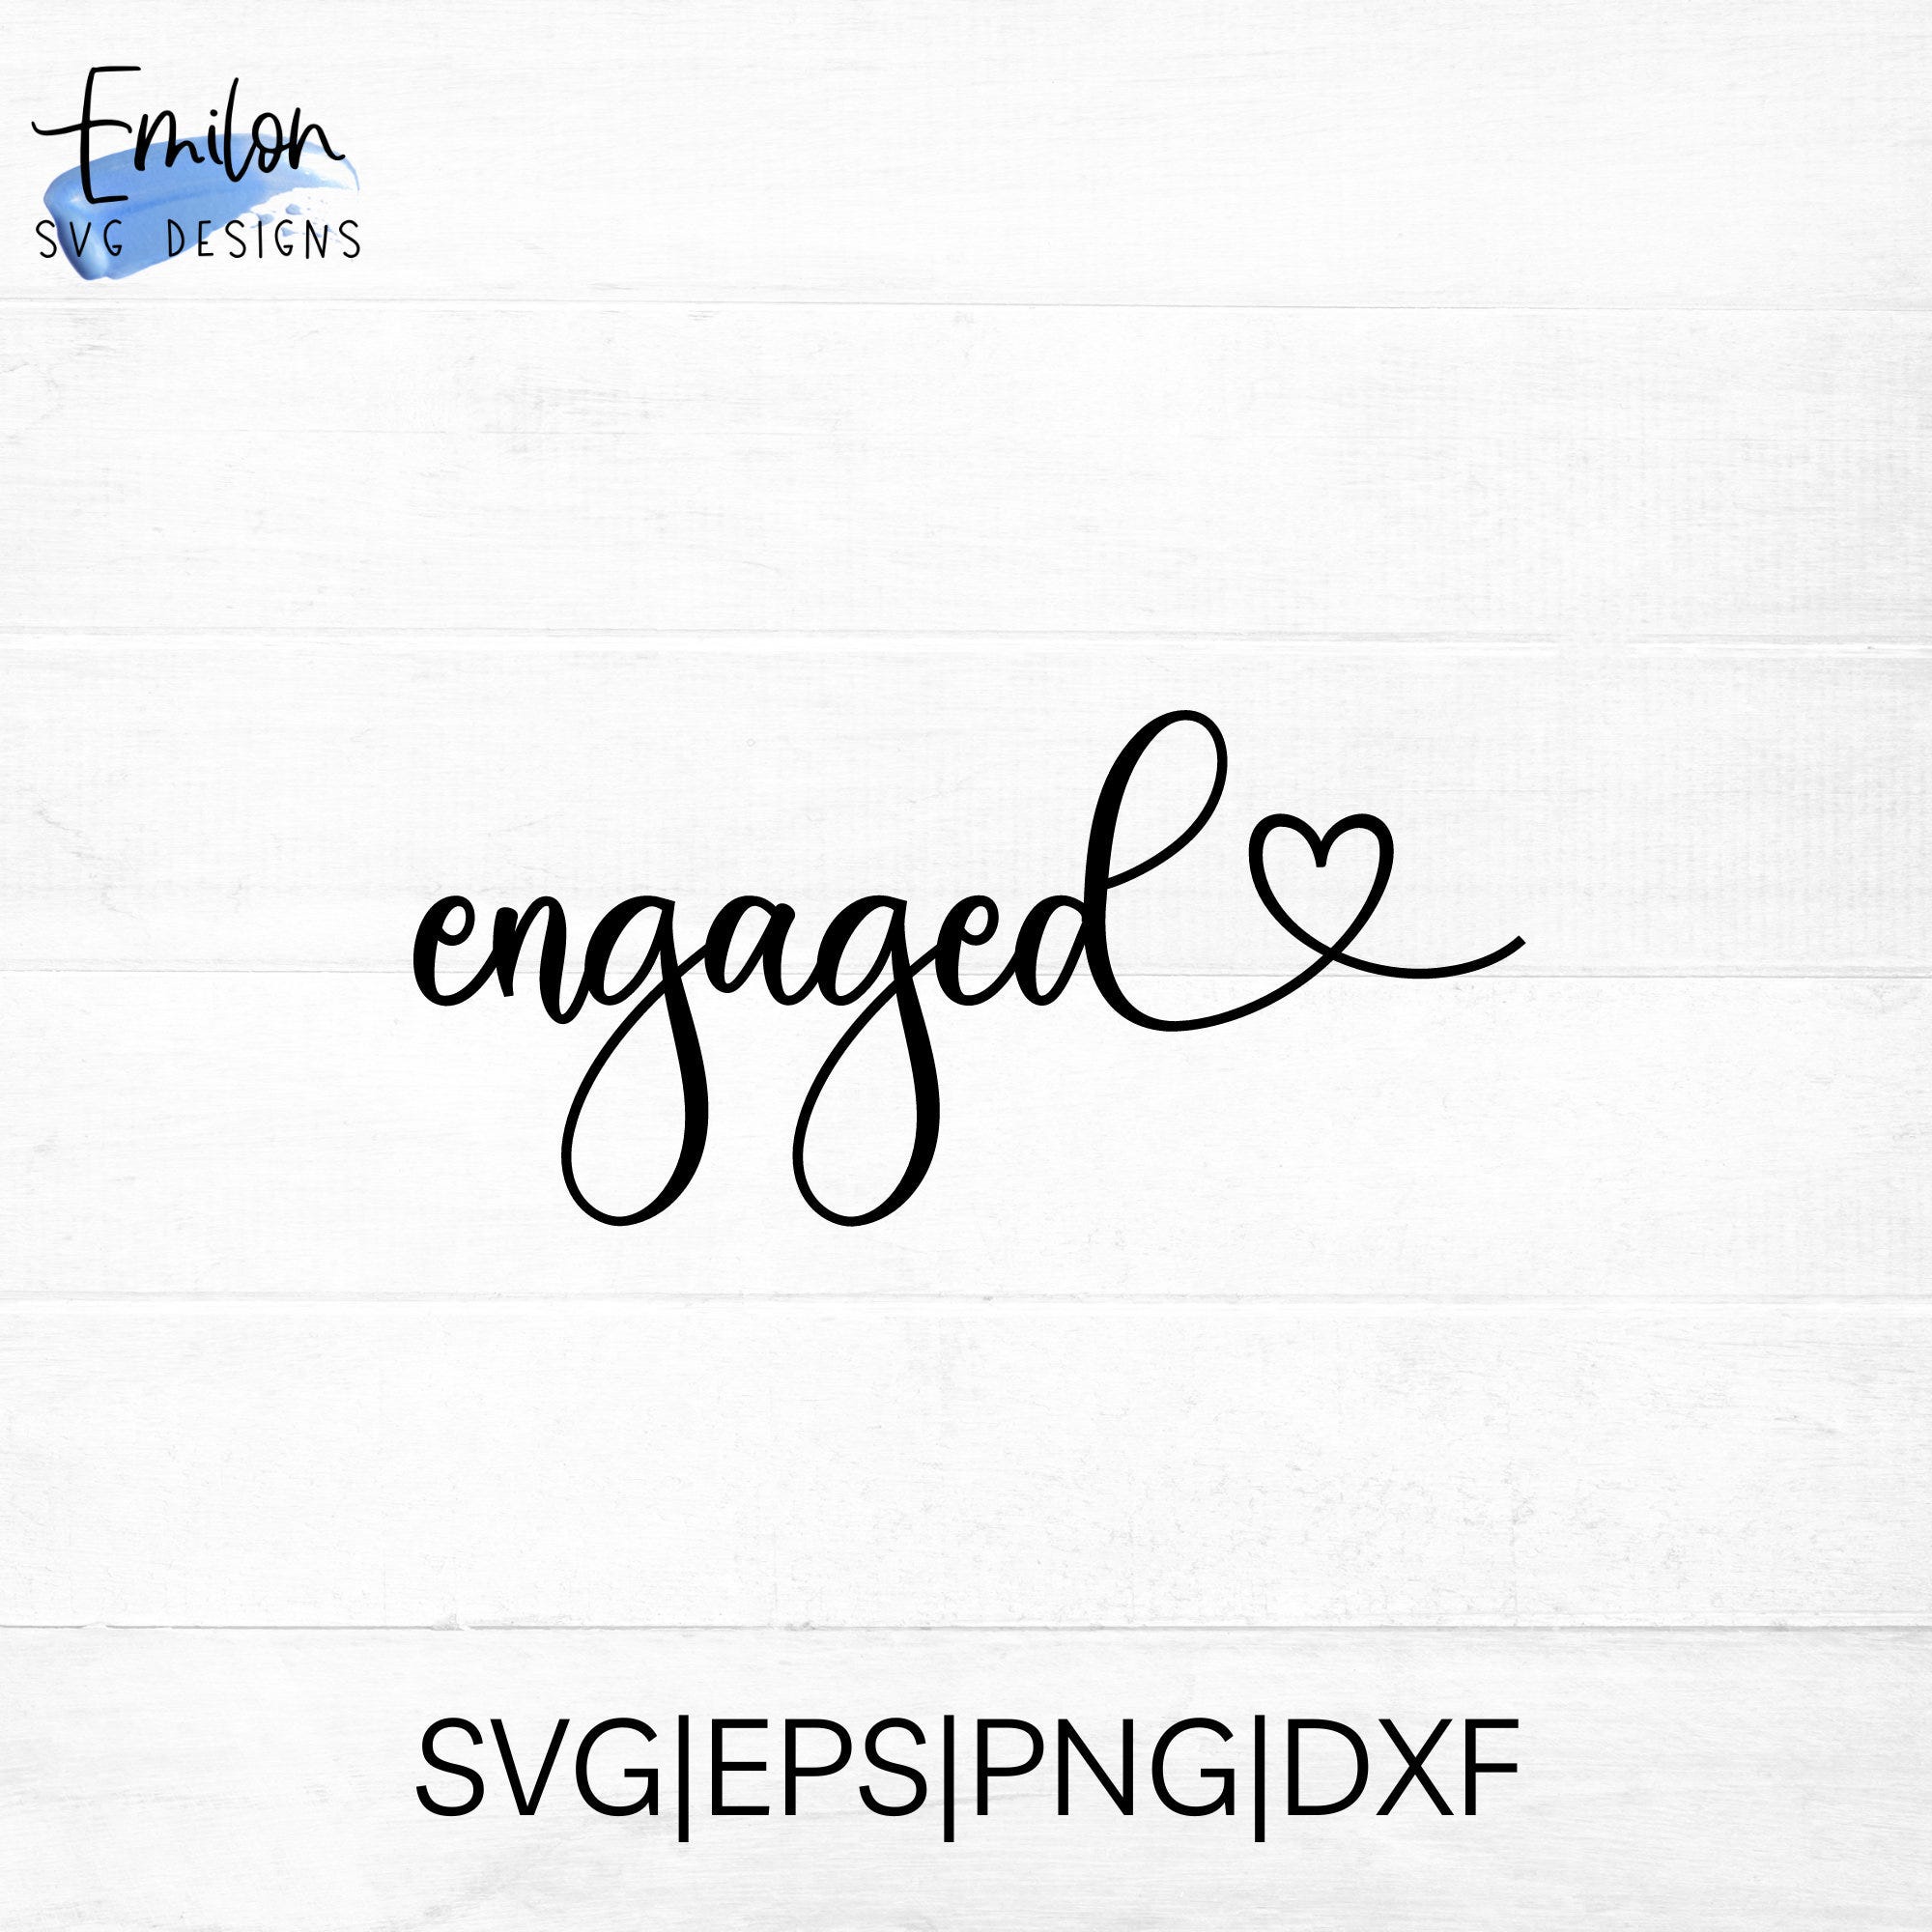 Engaged SVG cut file for cricut and silhouette with heart detail - Engagement SVG - PNG, eps, dxf